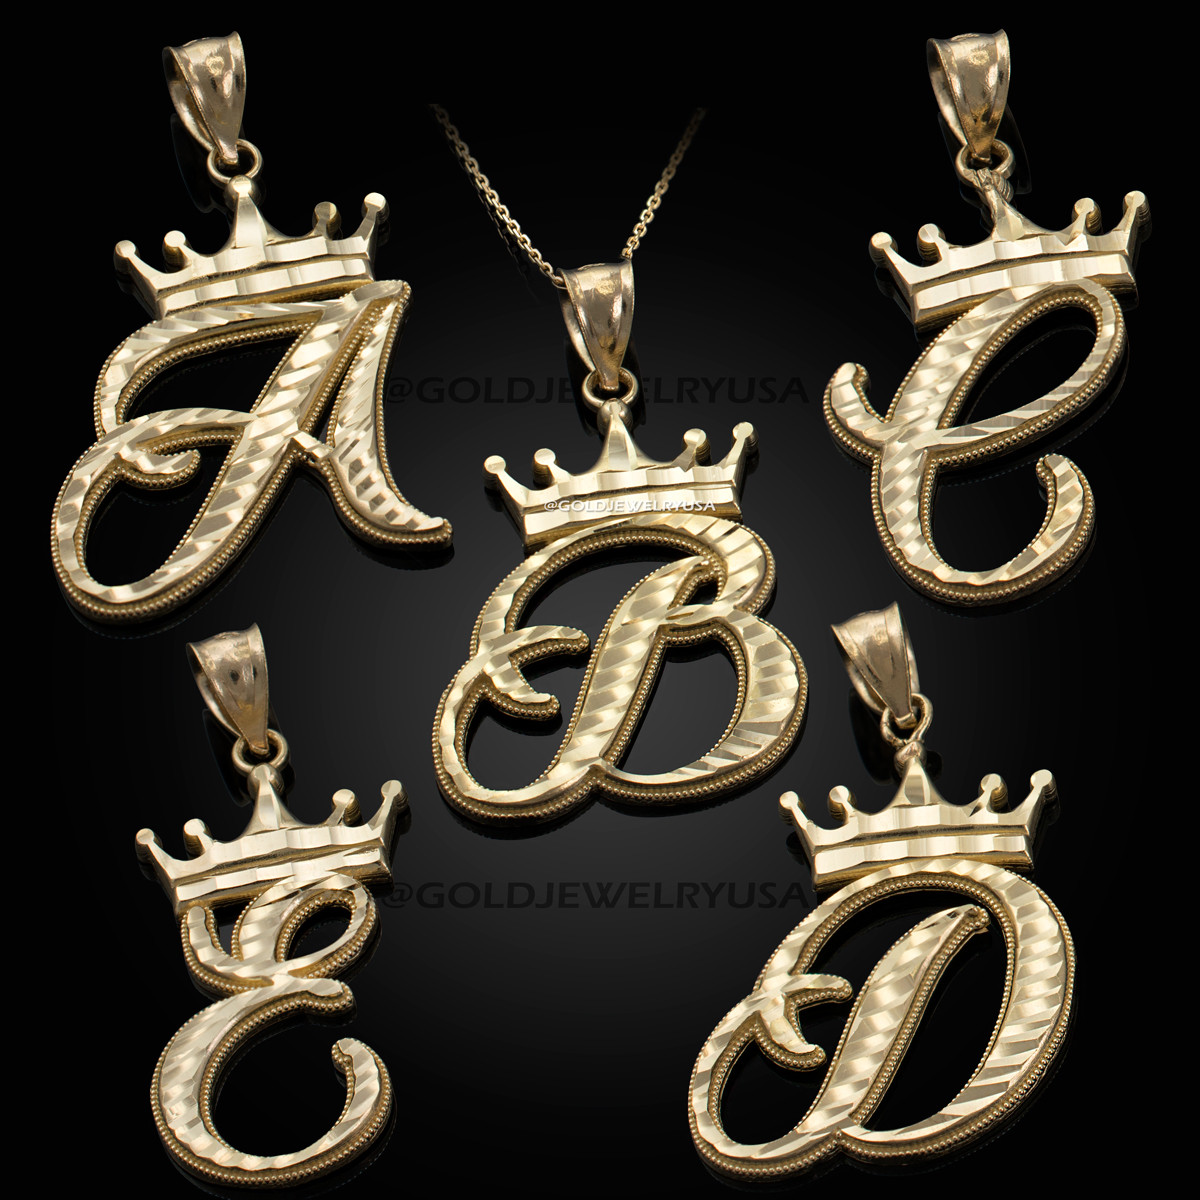 Fashionable and Chic Cursive Initial Necklaces | Styled